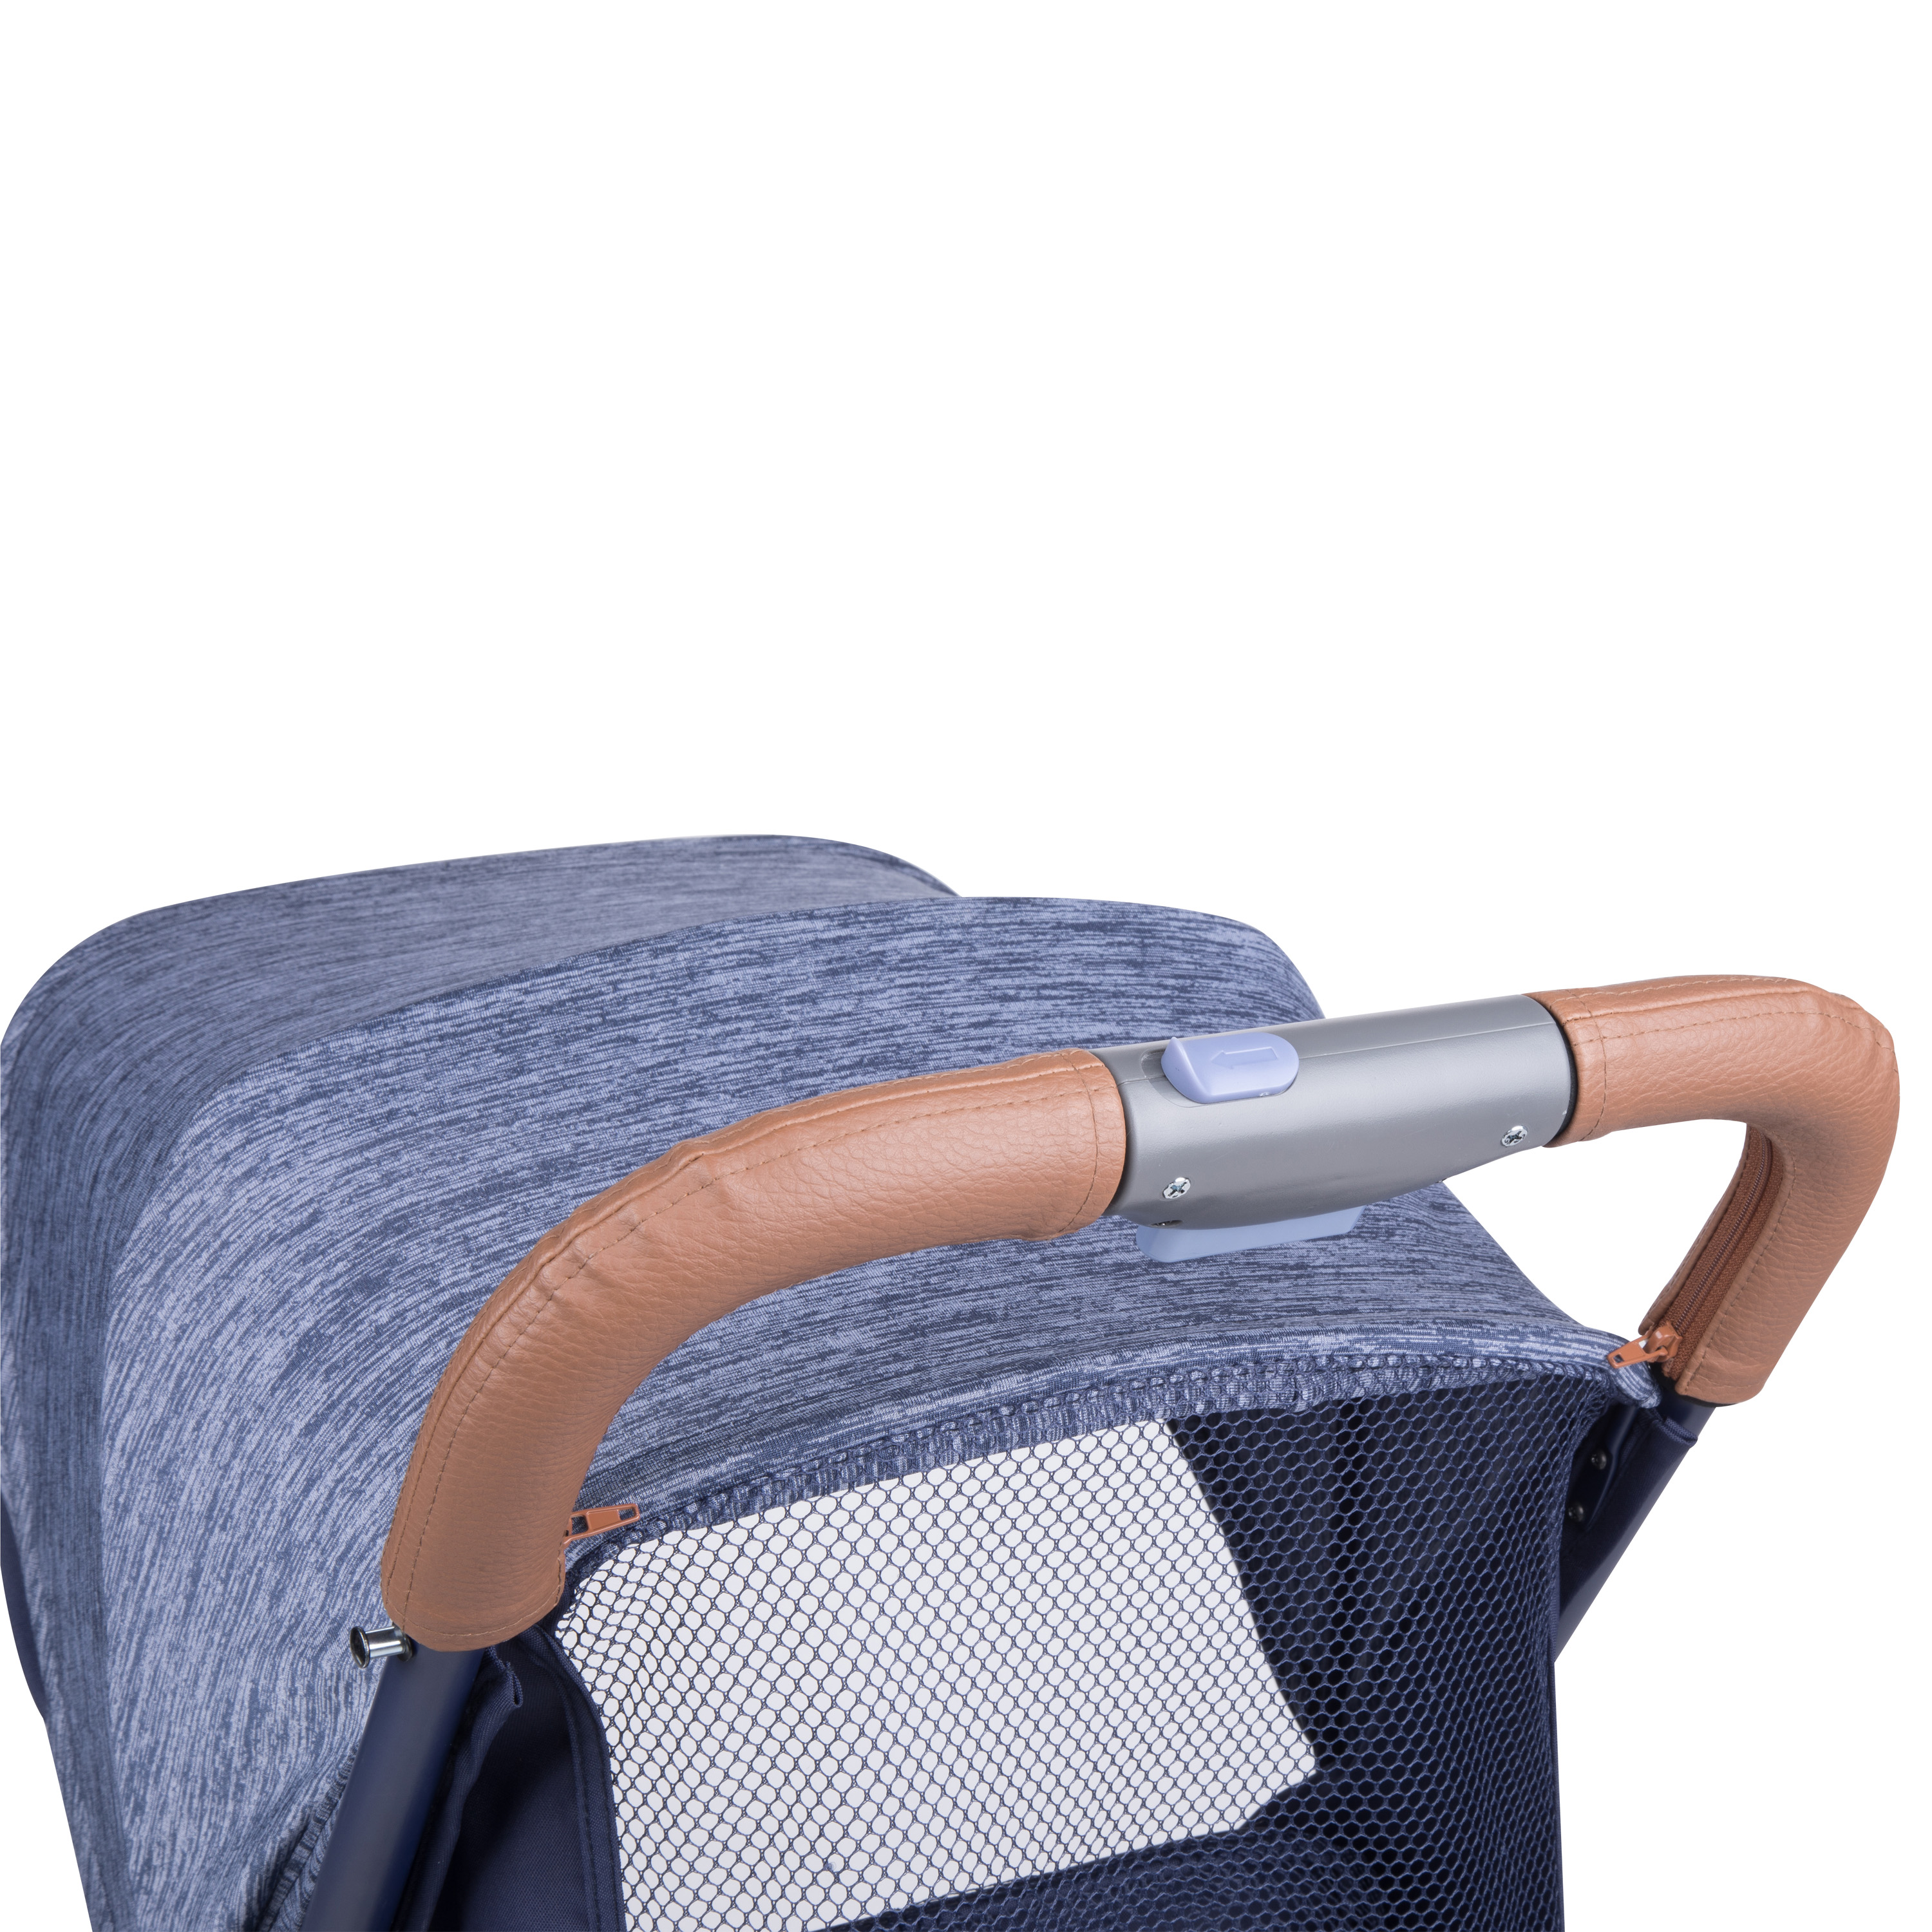 MonBebe Cube Compact Stroller with storage and visor, Blue Boho - image 13 of 17